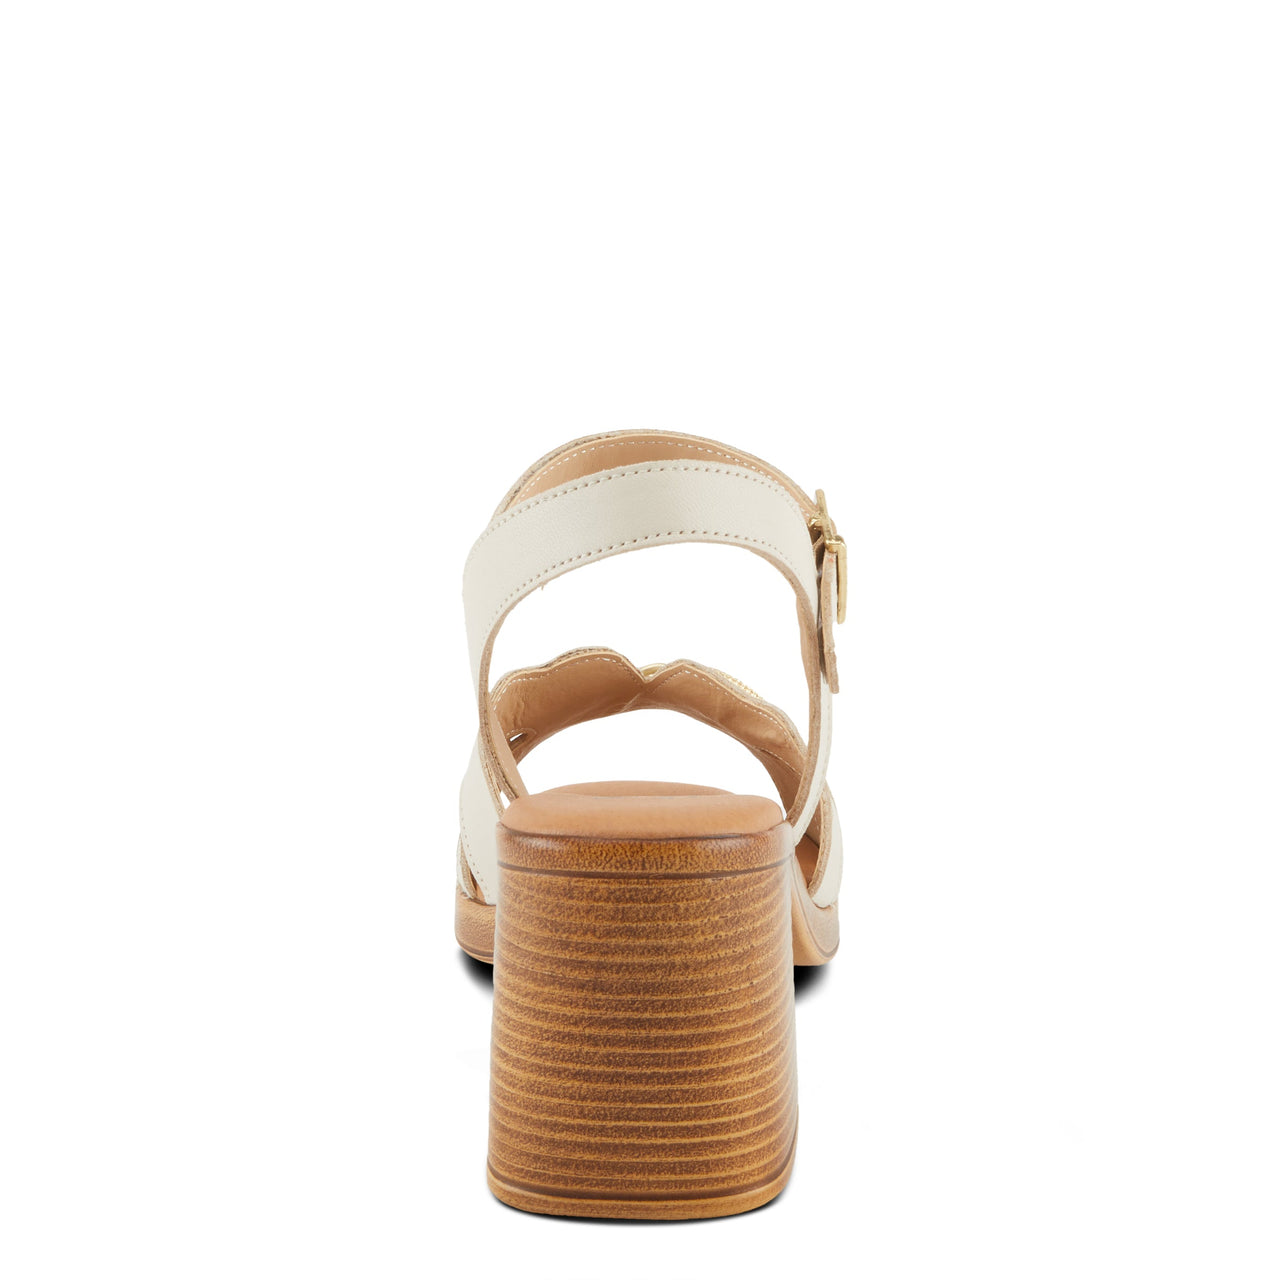  Classic Spring Step Sardinia Sandals in tan leather with braided straps and stacked heel